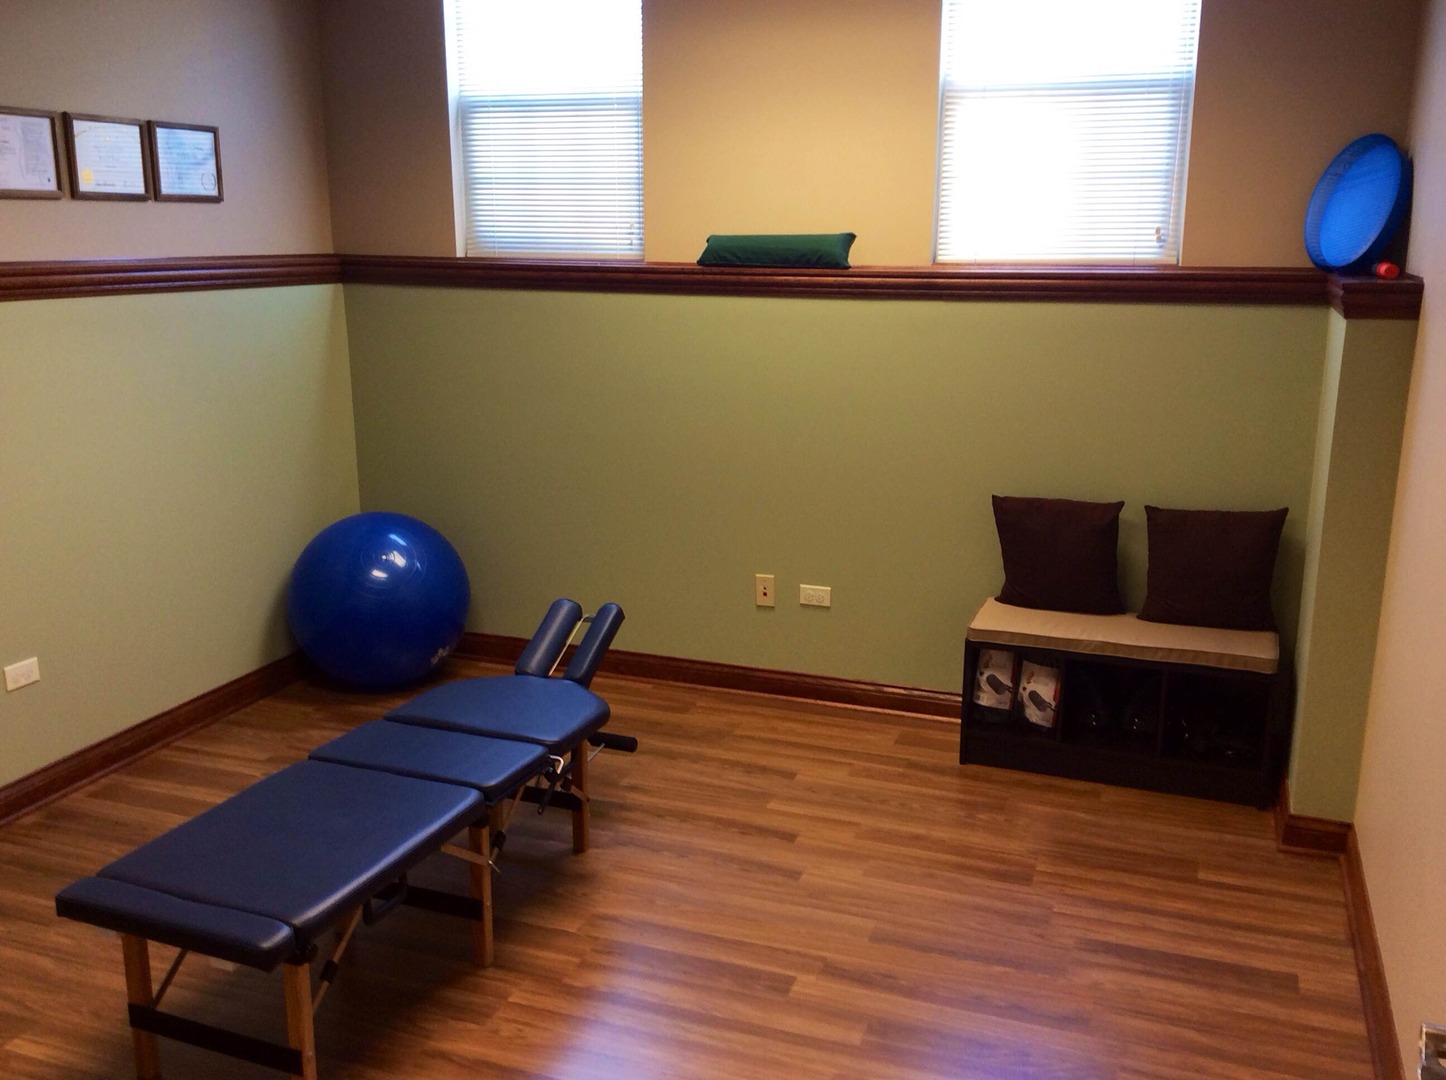 physical therapy and treatment room